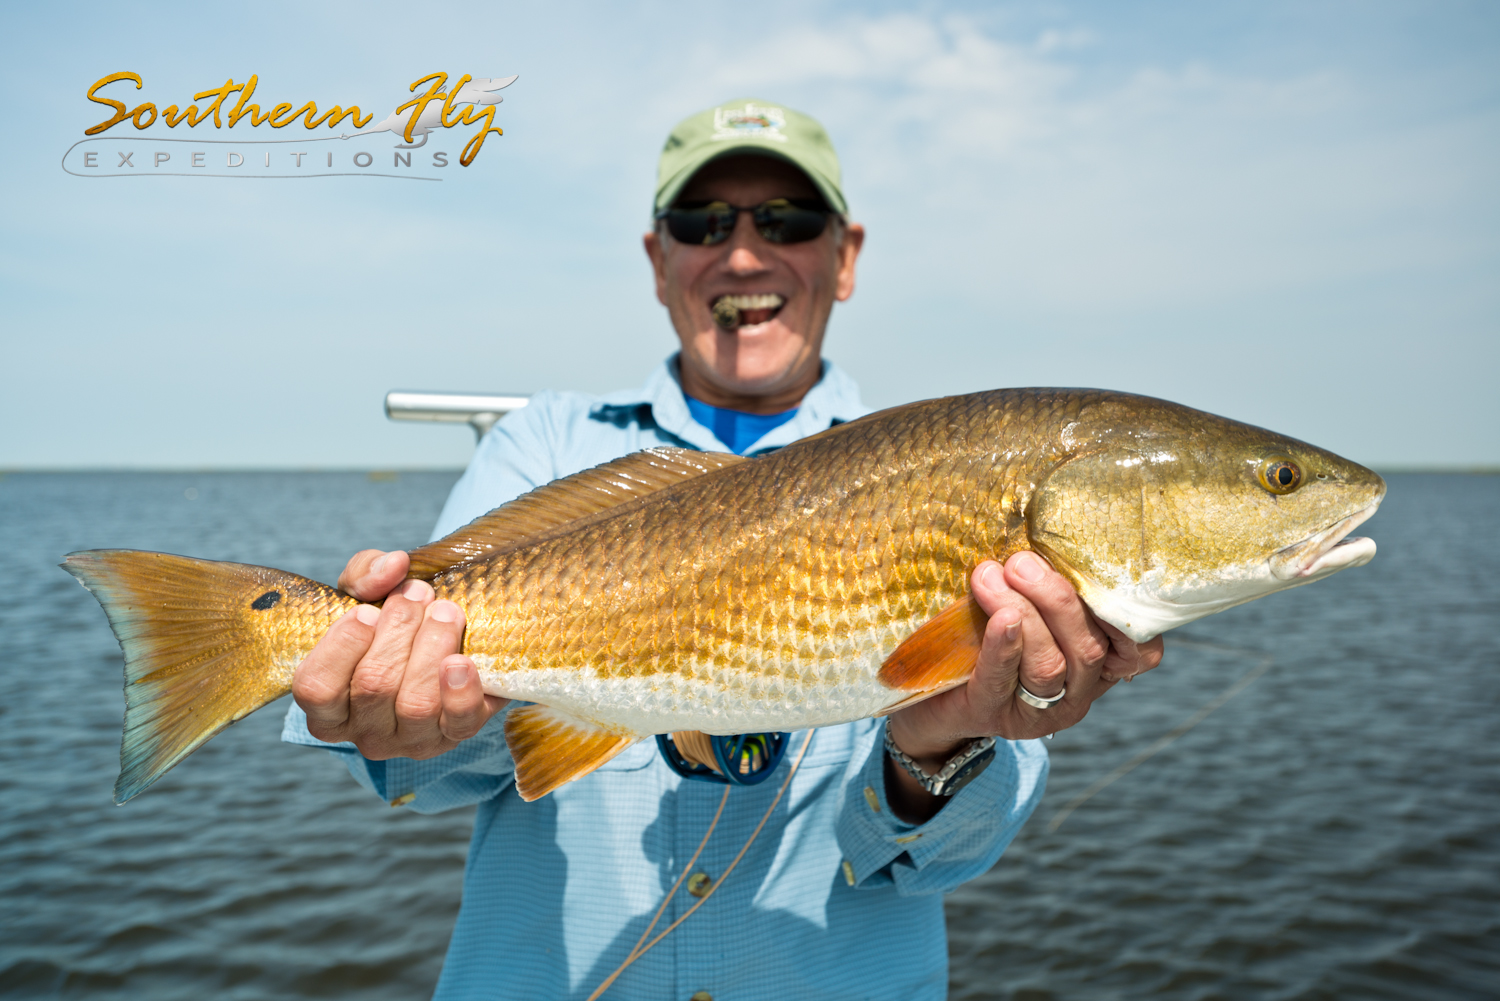 April 2014 Southern Fly Expeditions Fly Fishing Photos 